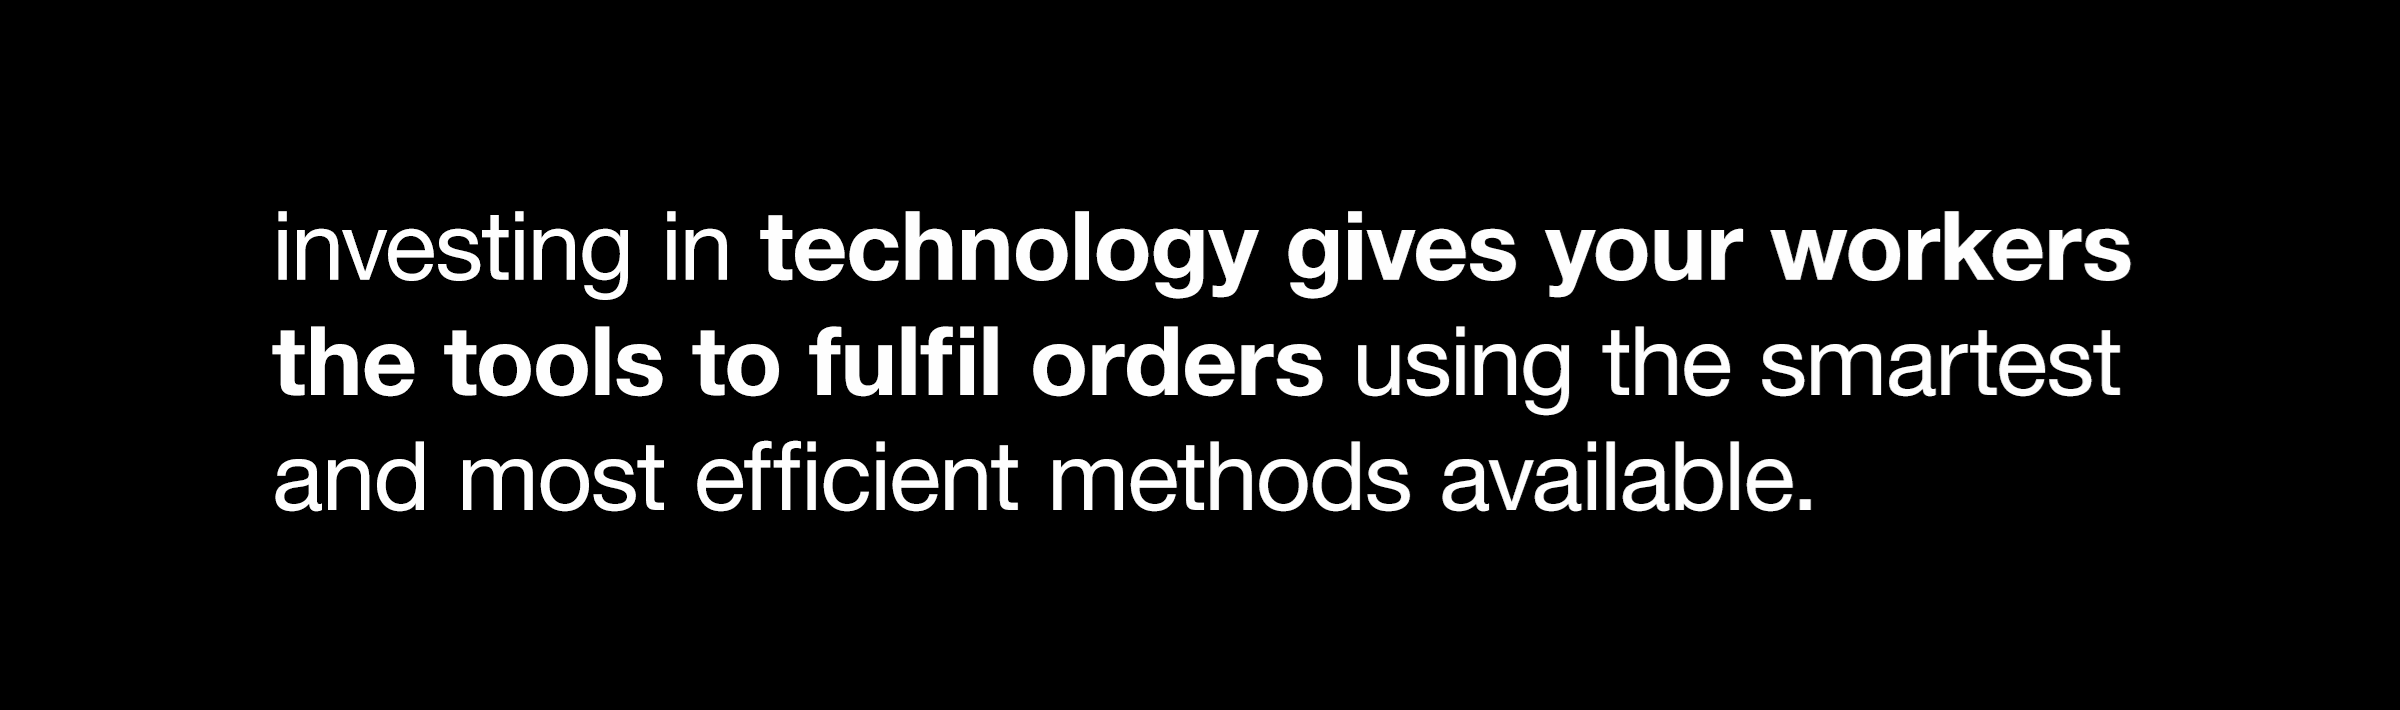 Tech quote image